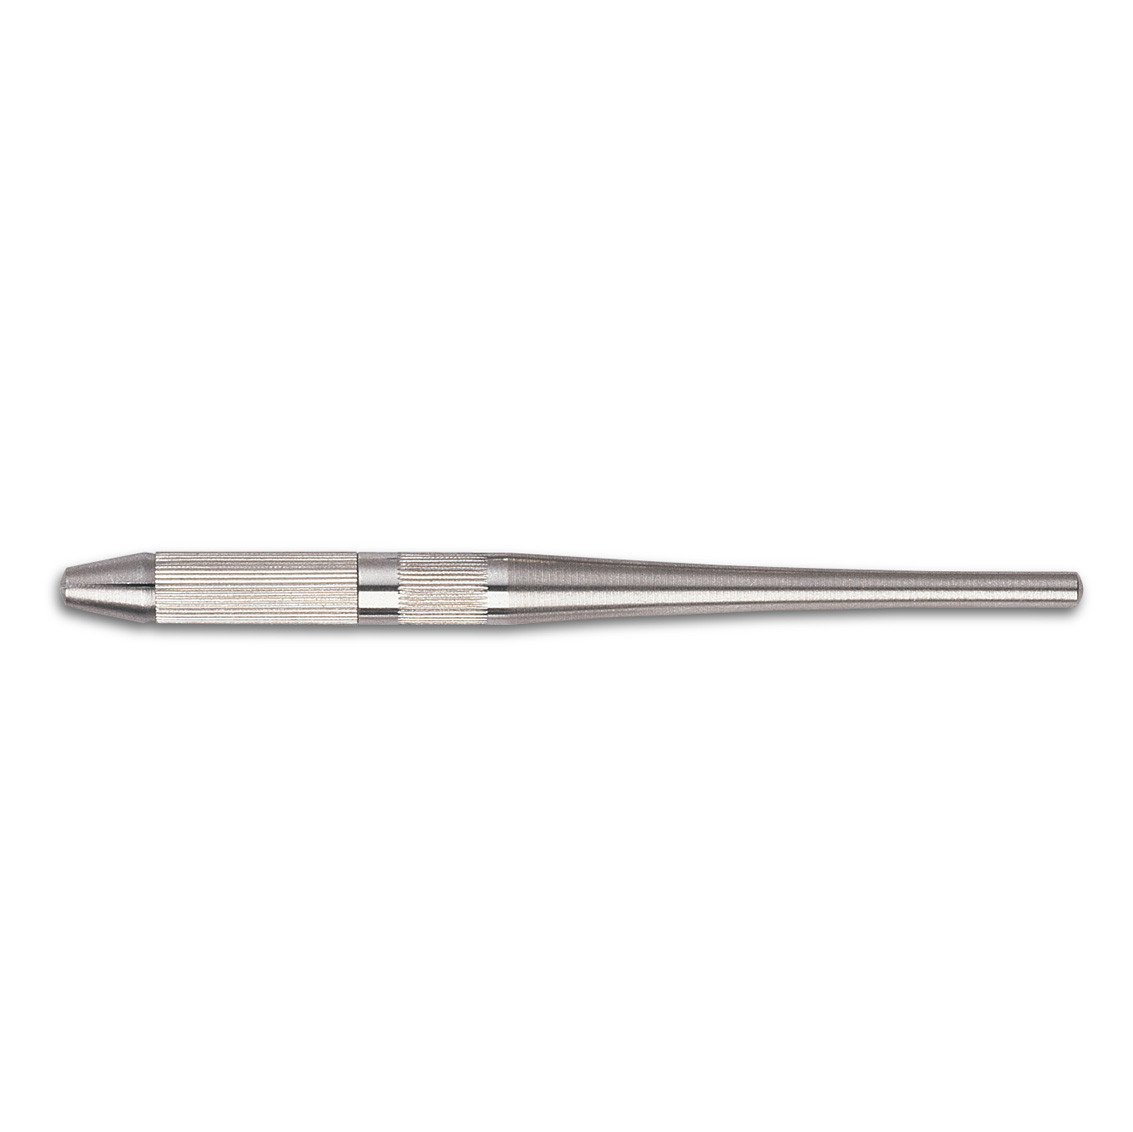 Universal stainless steel handle for gouge blades